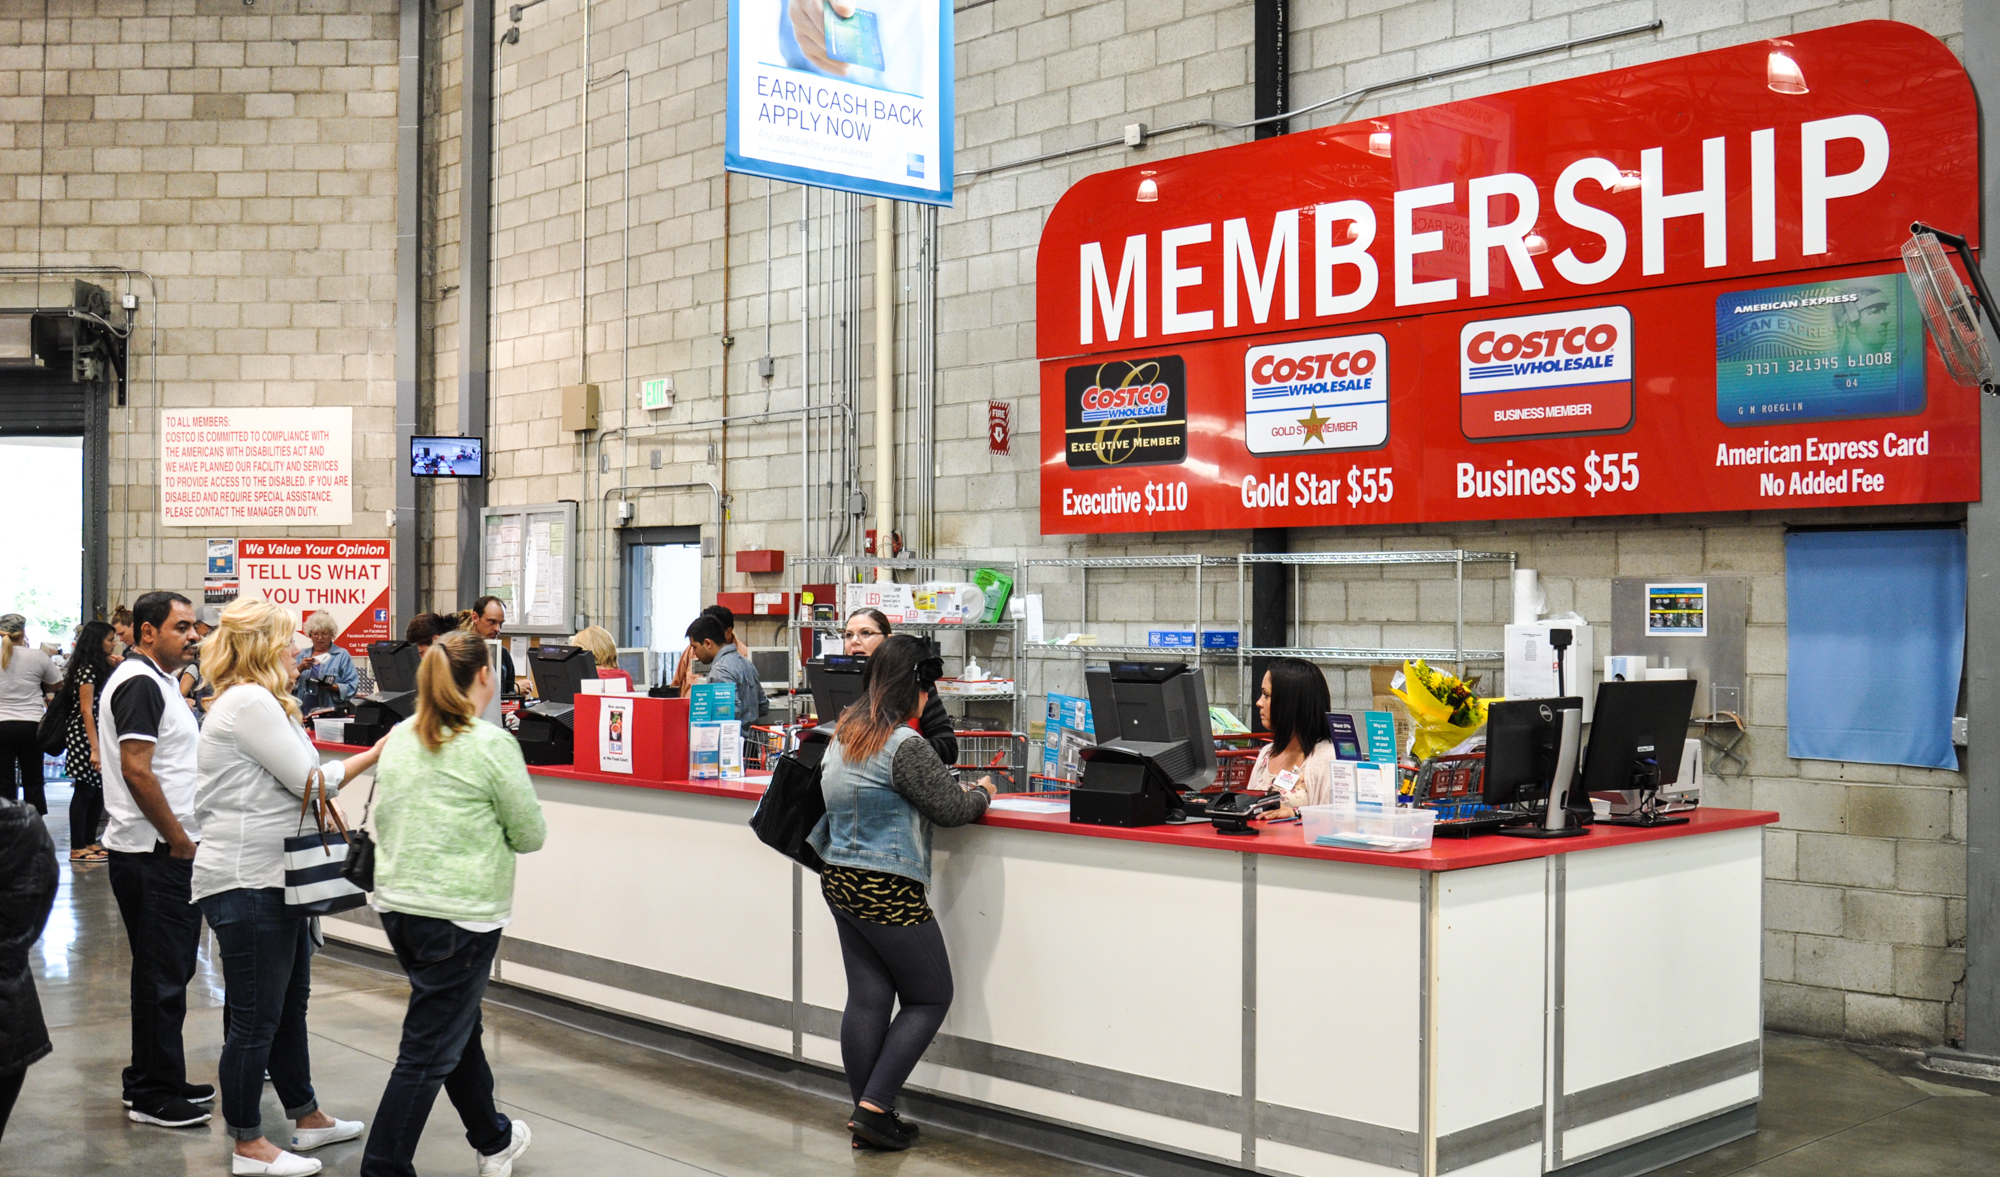 Is Costco really the best place to get deals on TVs and laptops?